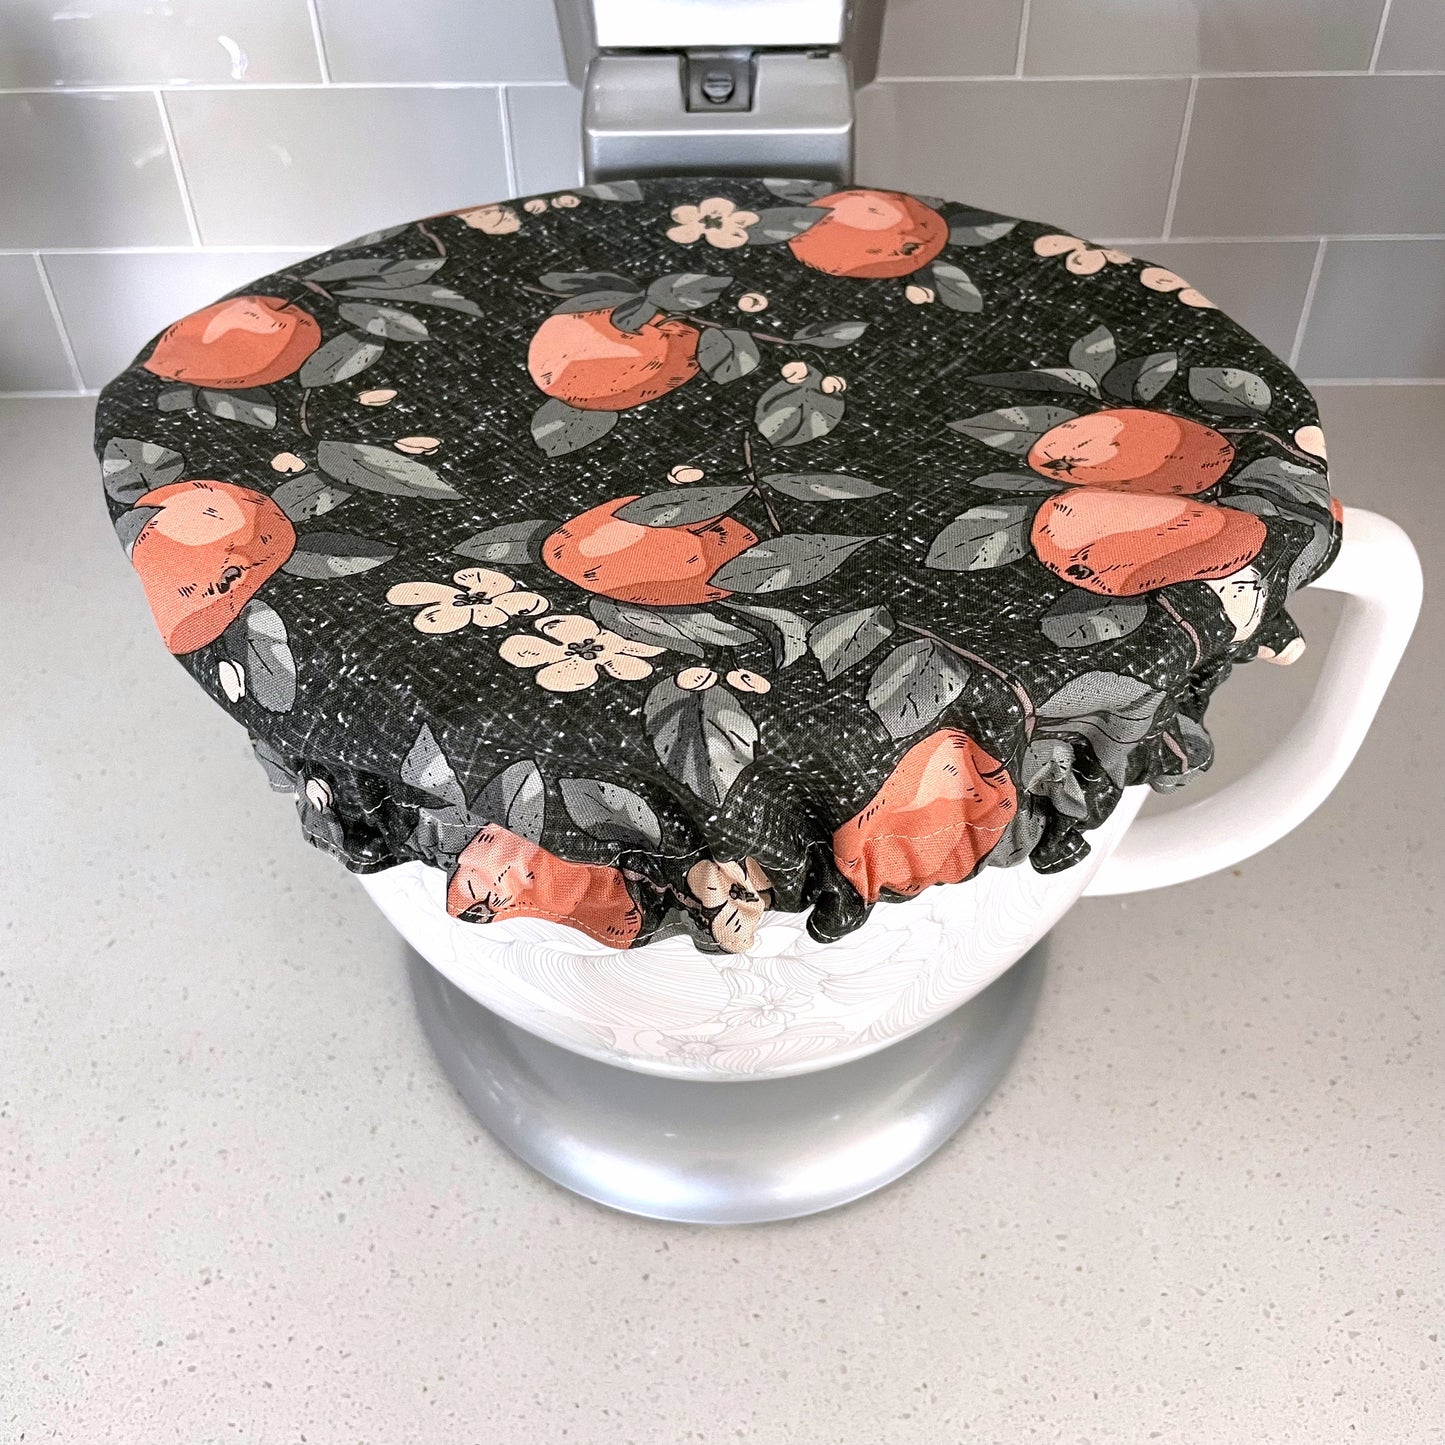 Stand Mixer Bowl Covers - Apples